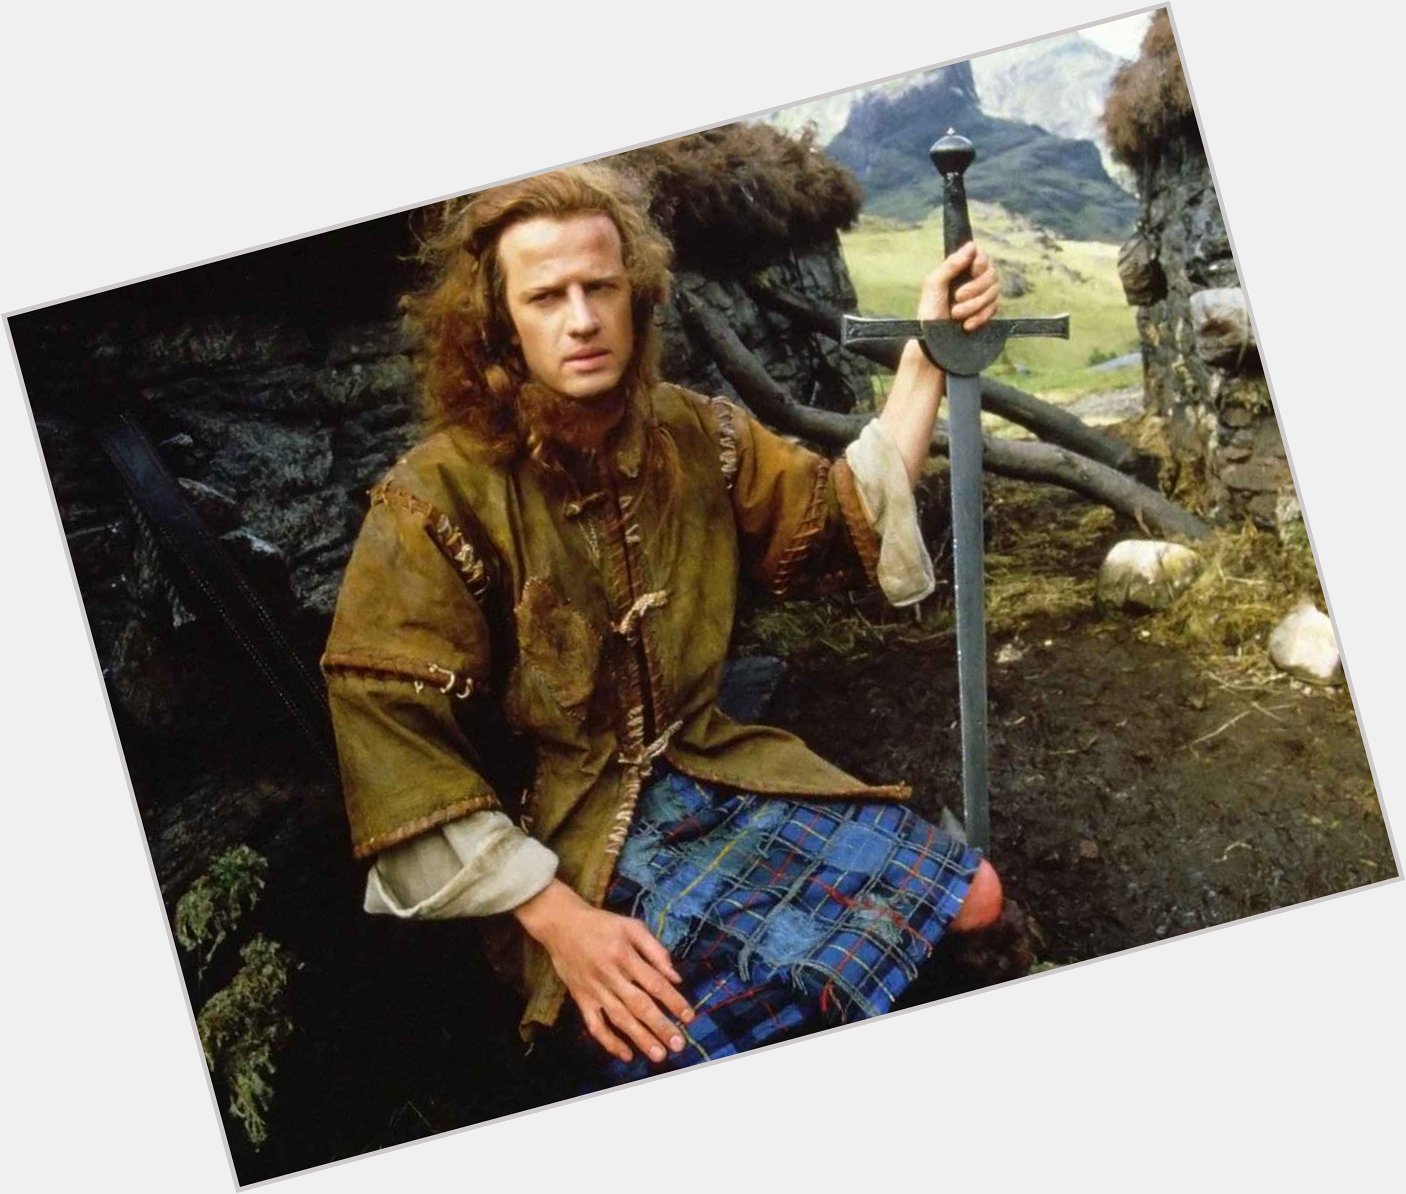 Happy birthday Christopher Lambert!
There can be only one! 